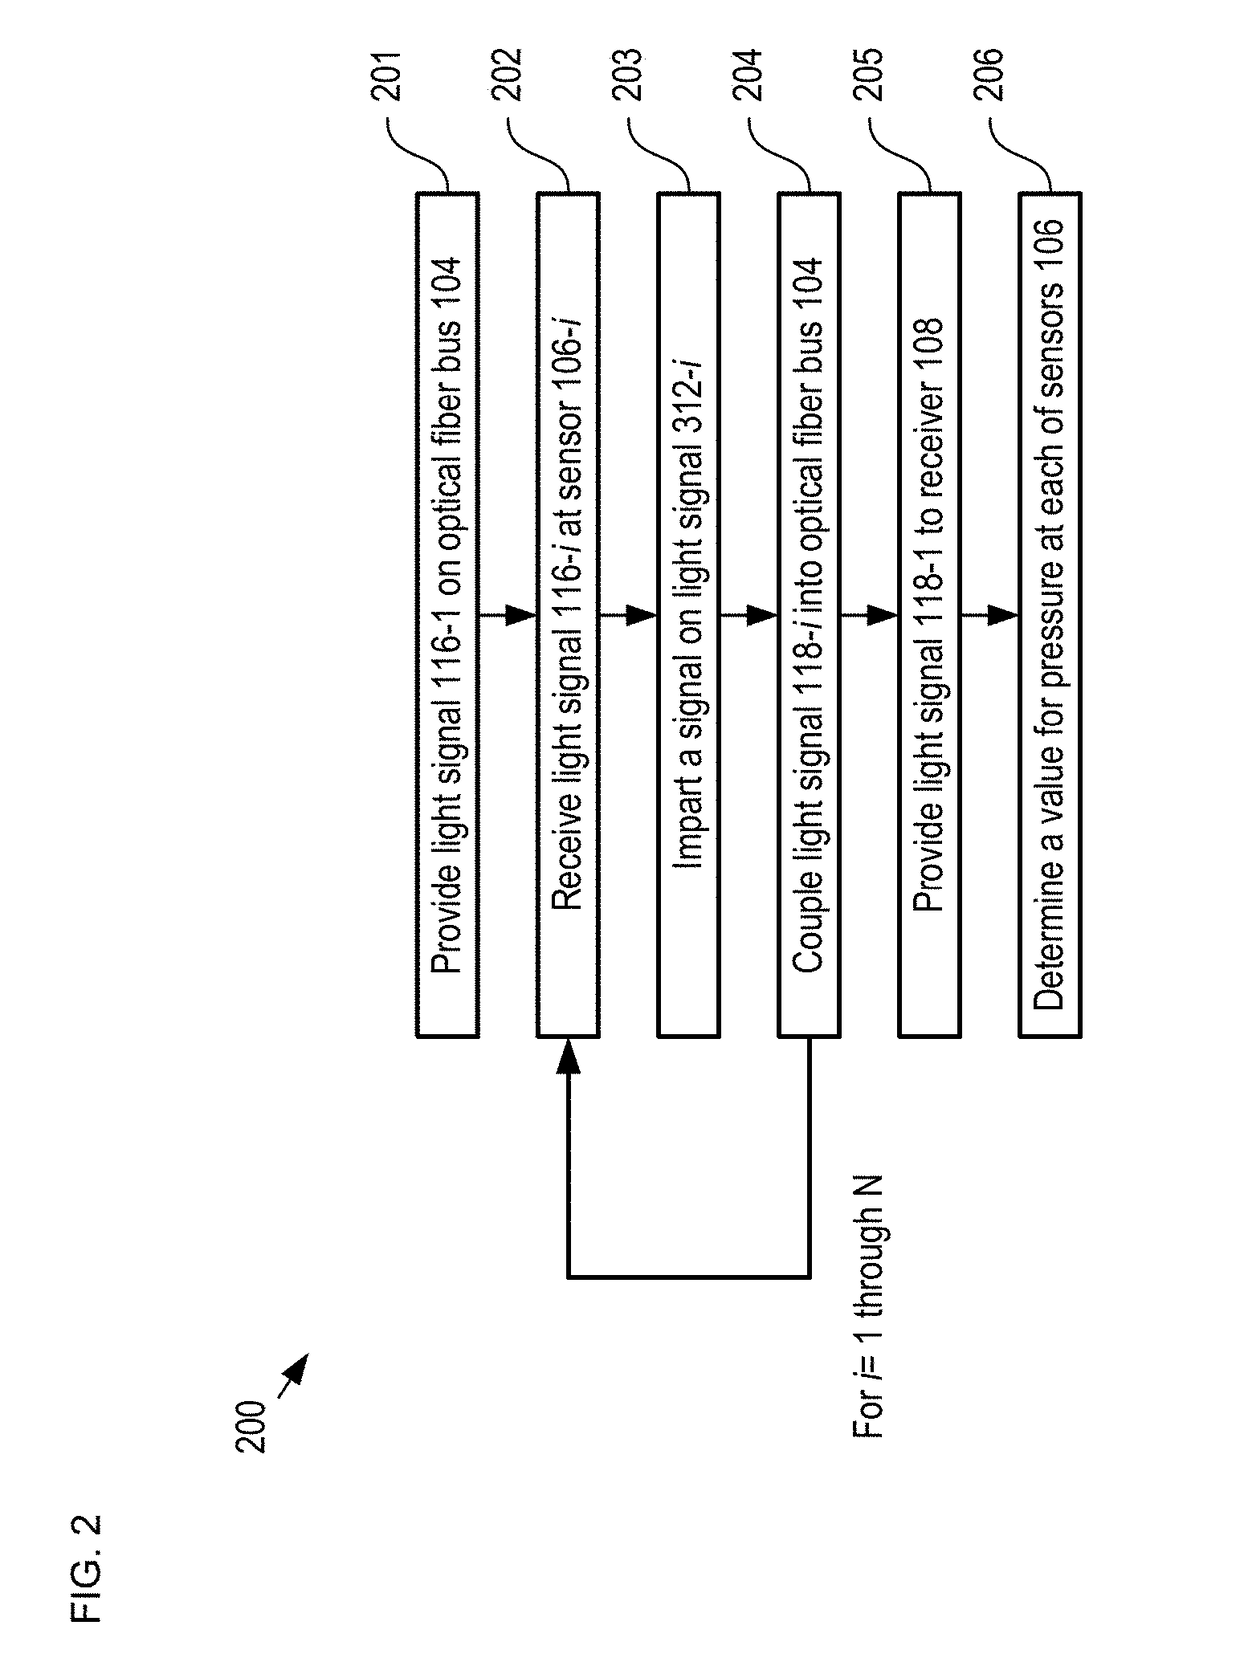 Multiplexed Fiber-Coupled Fabry-Perot Sensors and Method Therefor